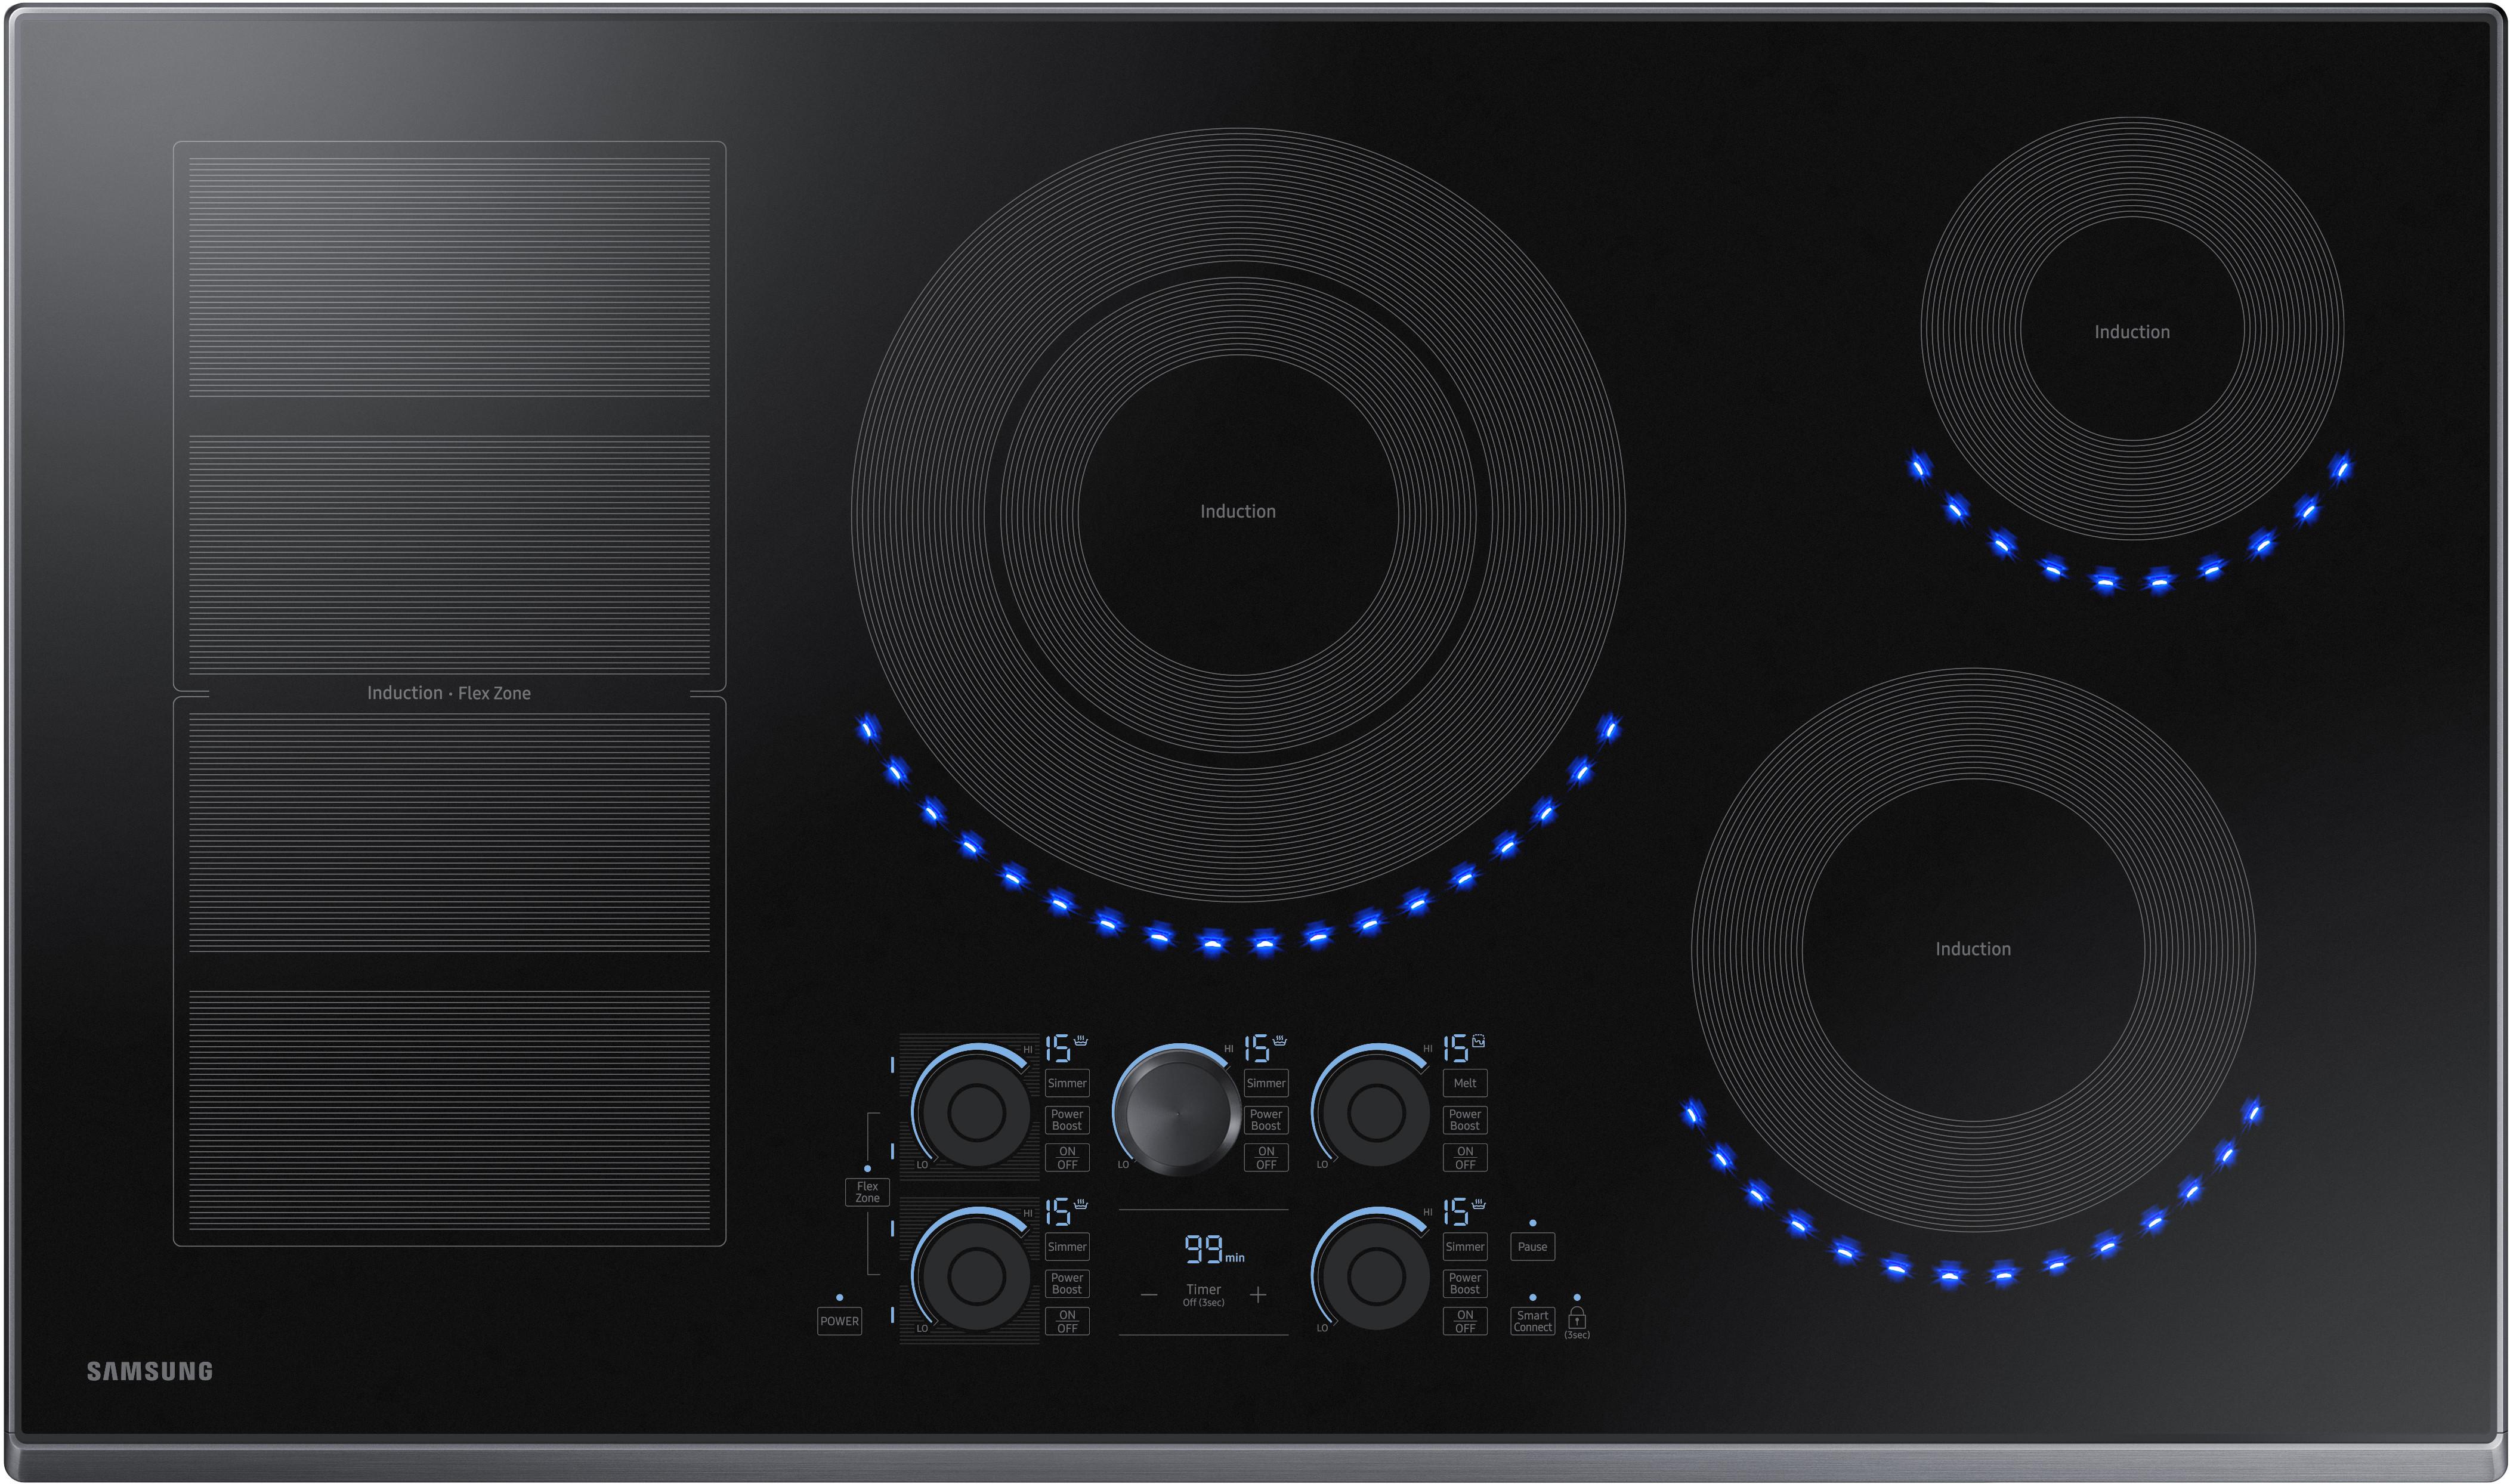 Samsung Induction Cooktop With Knobs